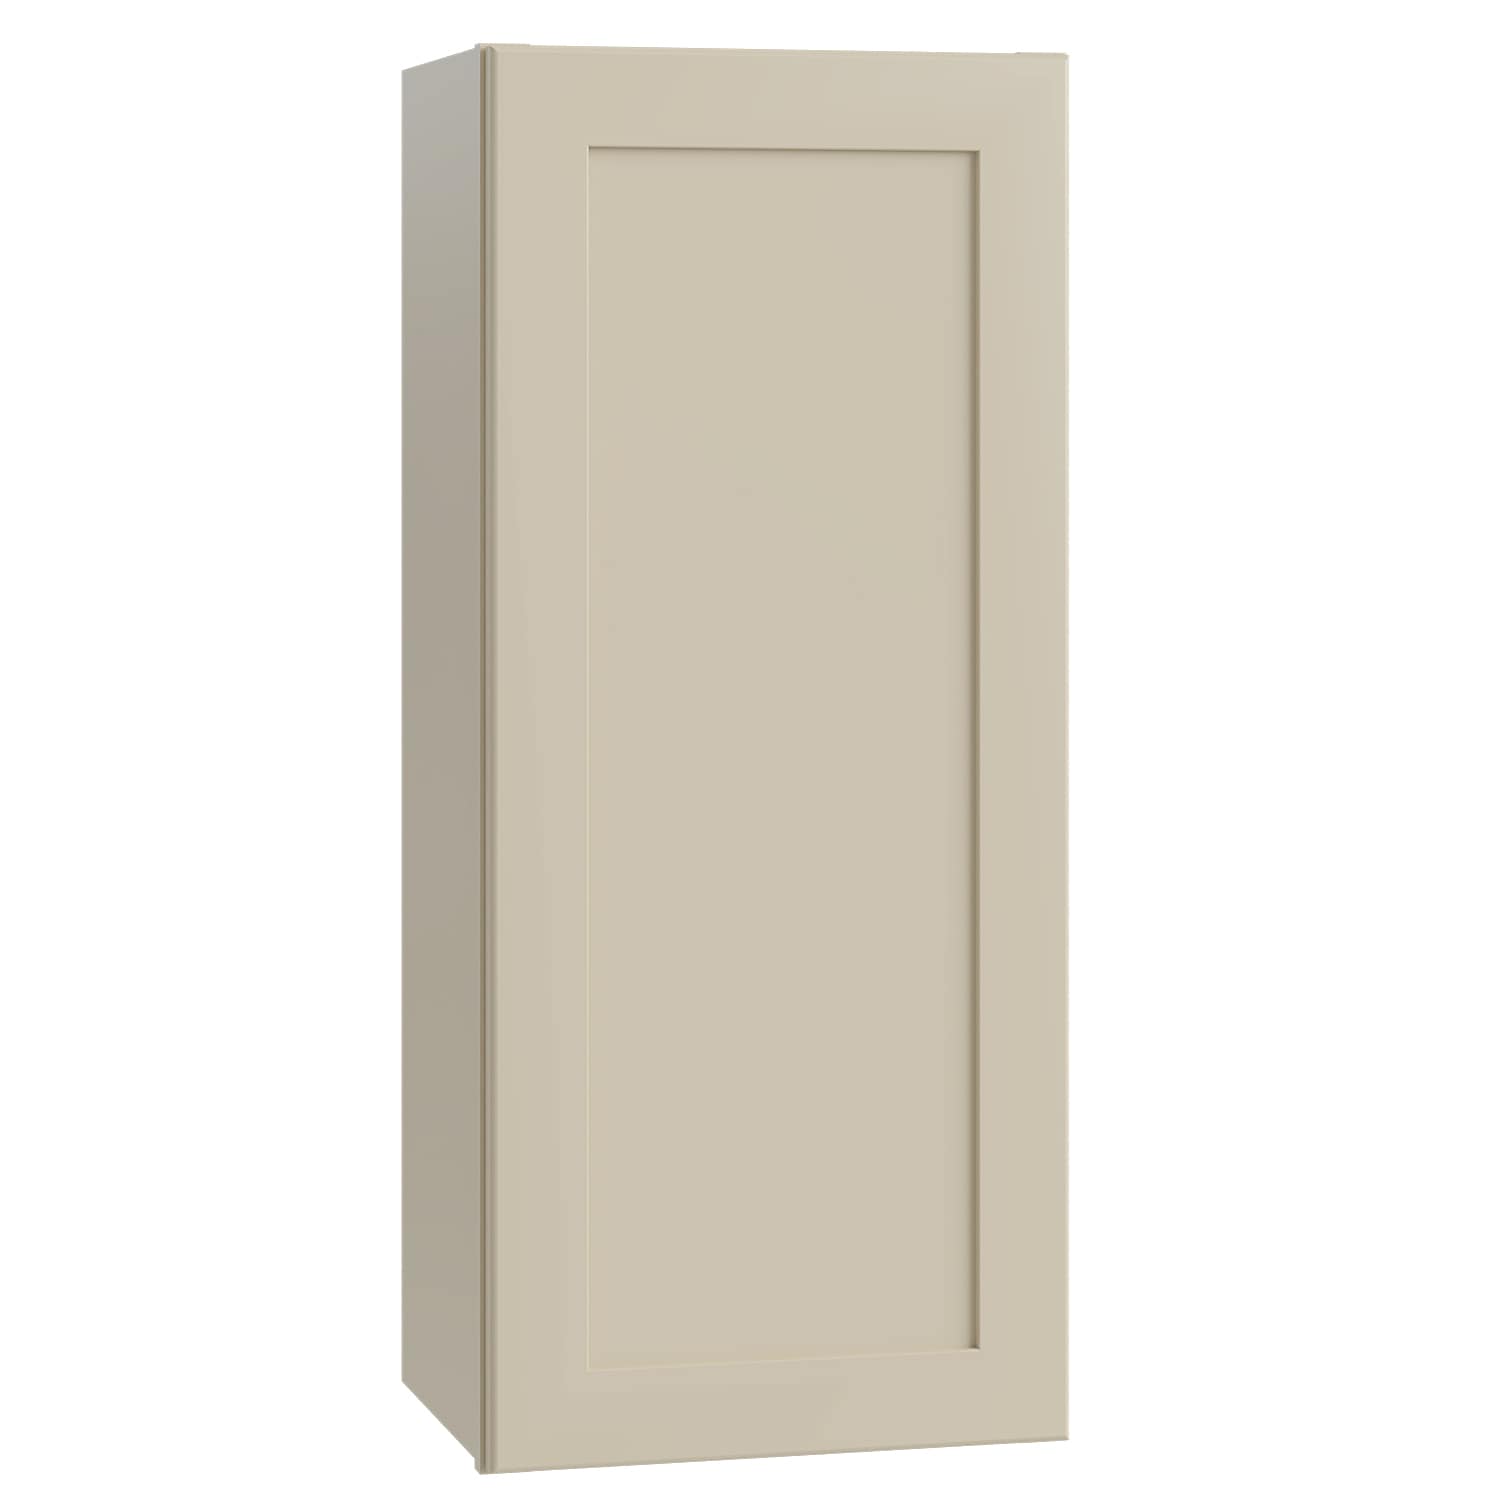 Luxxe Cabinetry 21-in W x 42-in H x 12-in D Norfolk Blended Cream Painted Door Wall Fully Assembled Semi-custom Cabinet in Off-White | W2142L-NBC